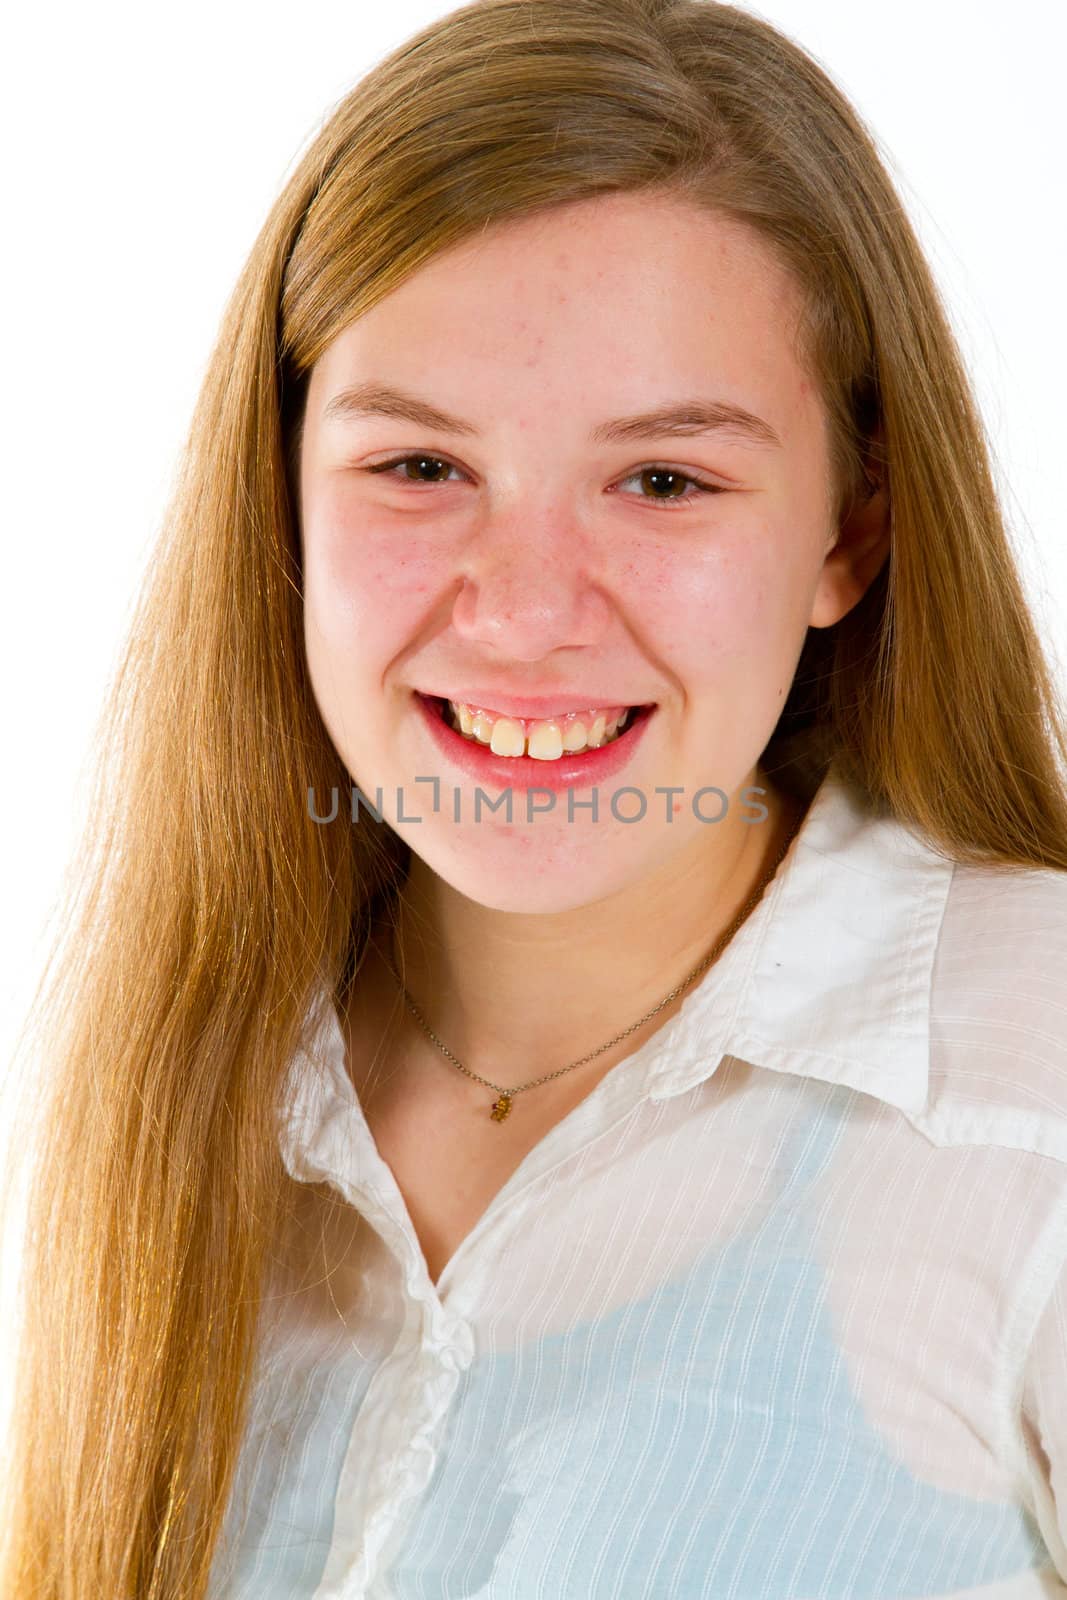 A young girl against a white background in the studio for a simple portrait.